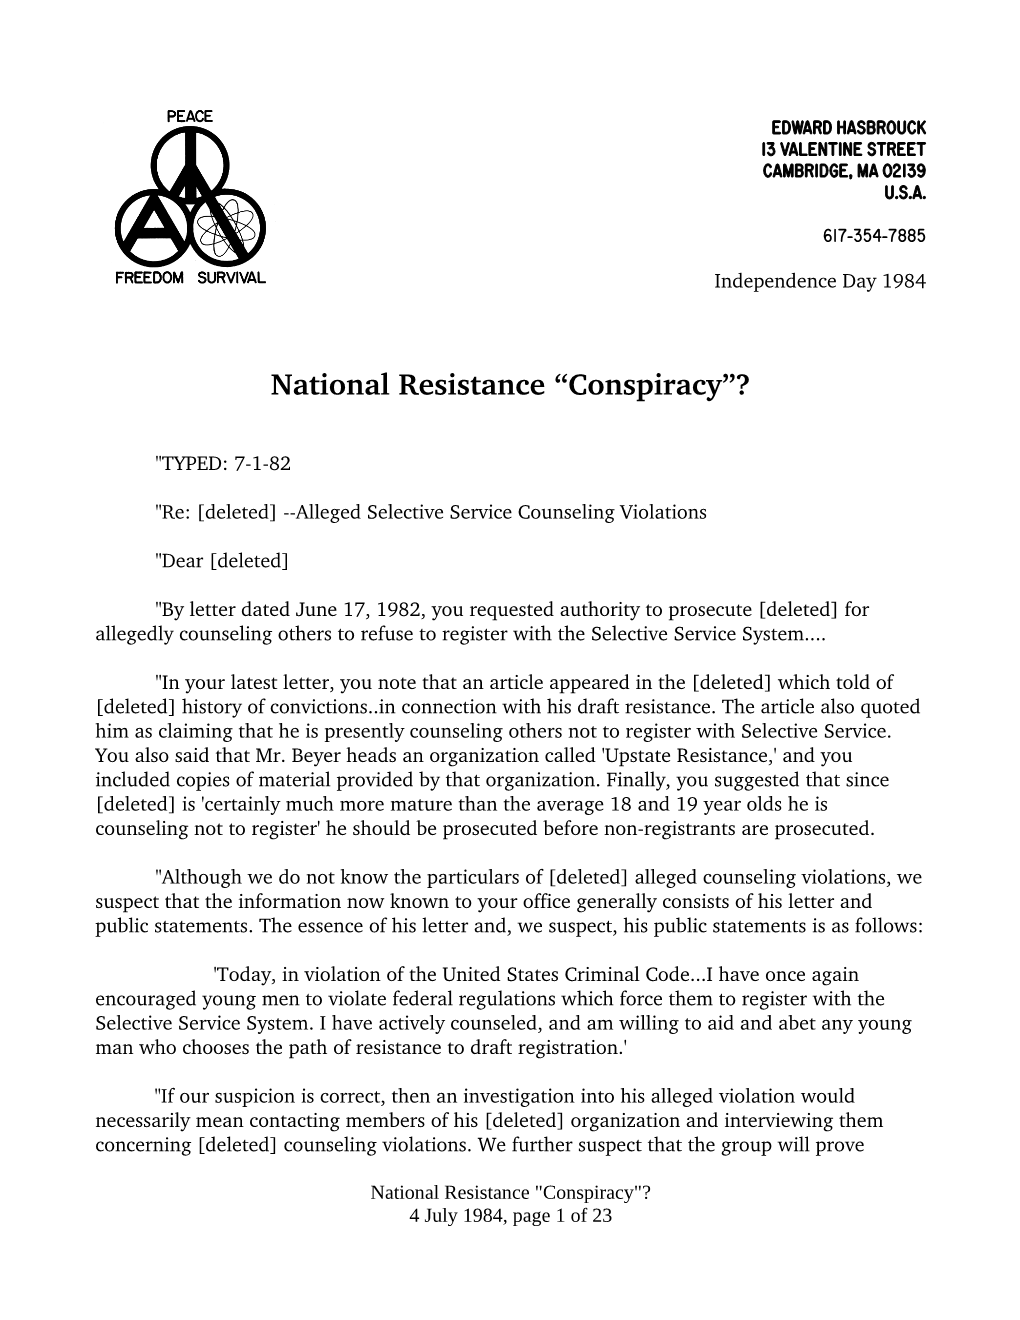 National Resistance “Conspiracy”?